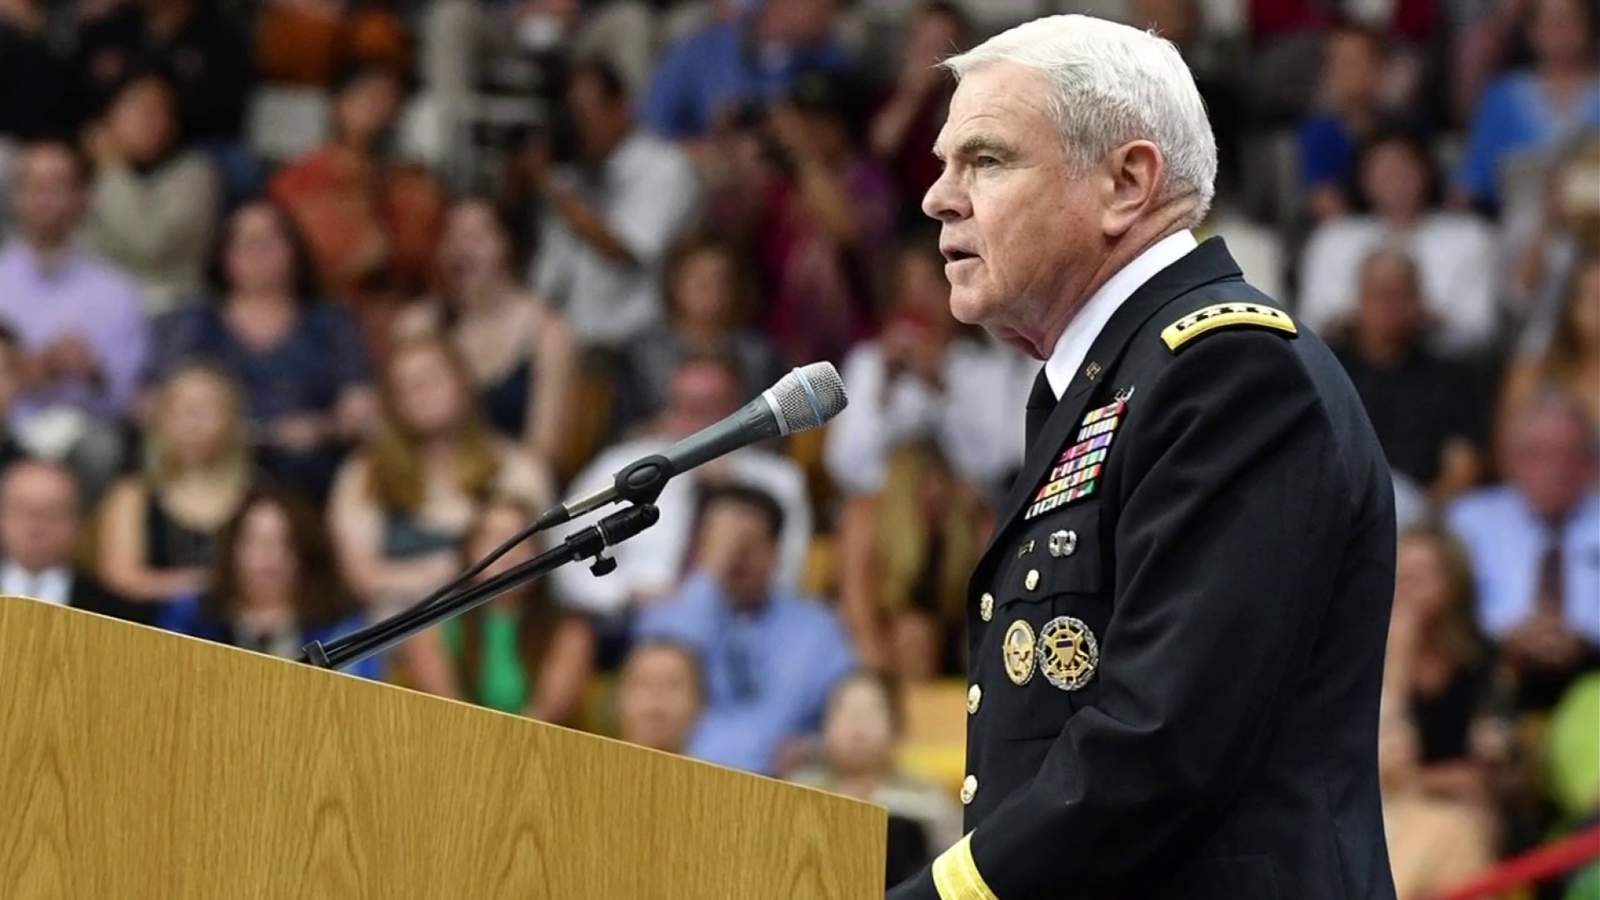 Superintendent of Virginia Military Institute resigns following accusations of ‘relentless racism’